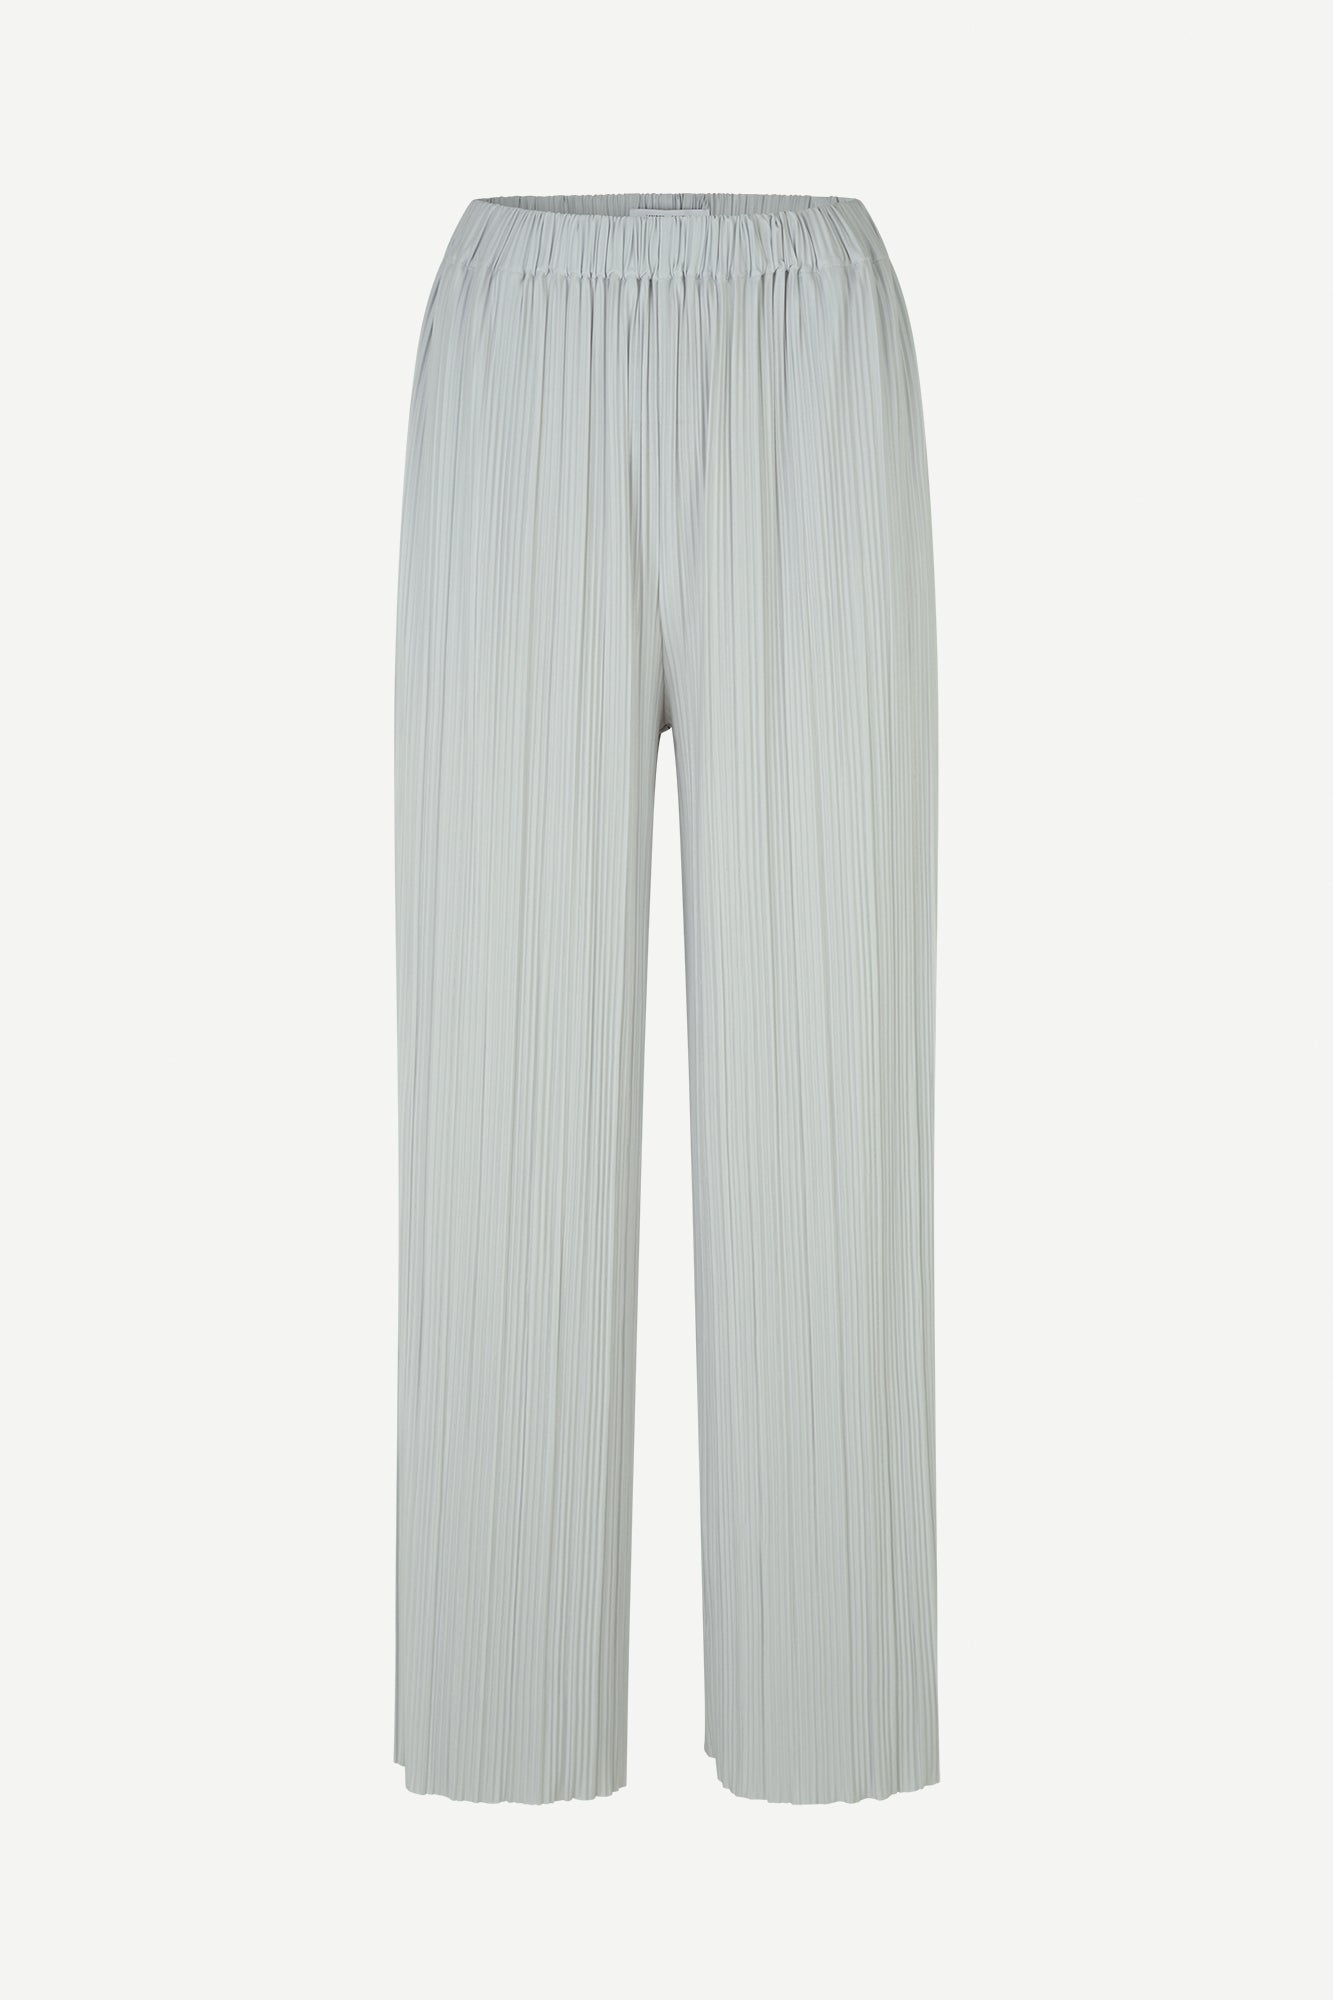 Pleated trousers in oyster mushroom